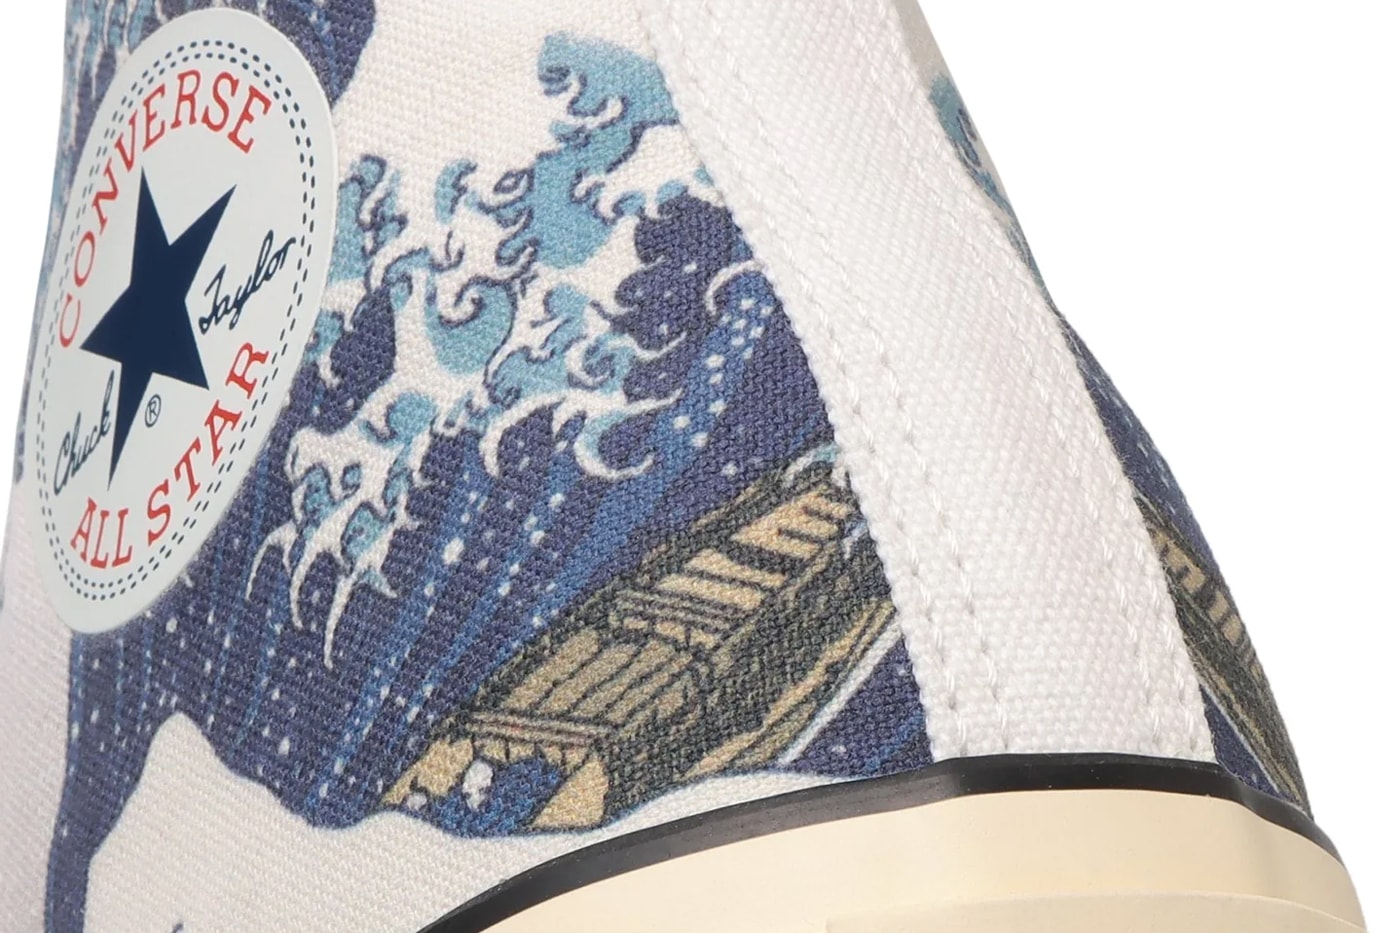 Converse All Star UKIYOEPRINT The Great Wave off Kanagawa Takiyasha the Witch and the Skeleton Spectre 31310151 31310150 Release Info